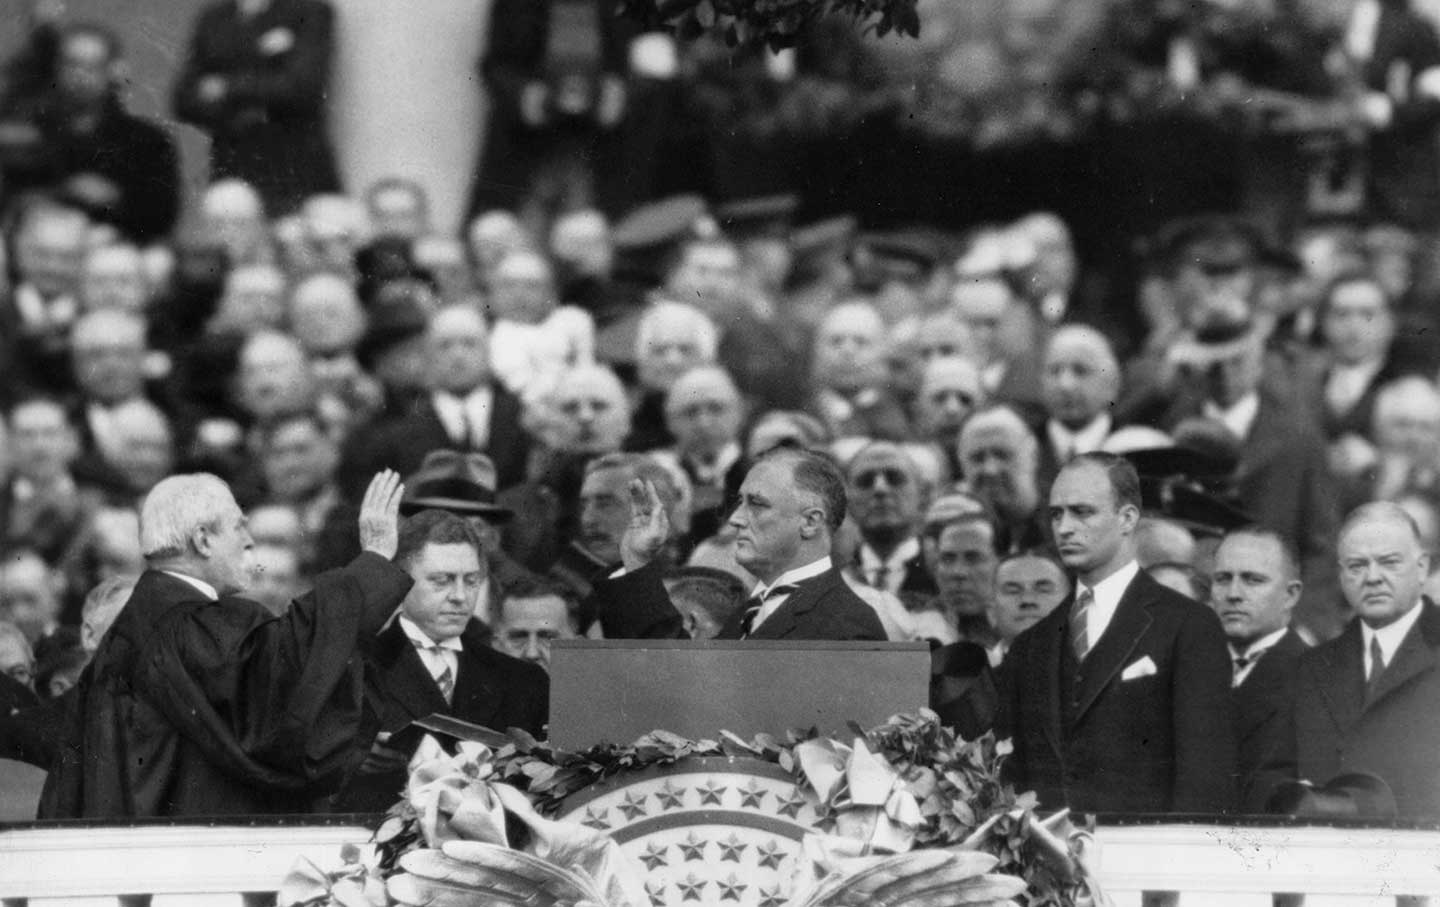 Franklin Delano Roosevelt at his inauguration in 1933.